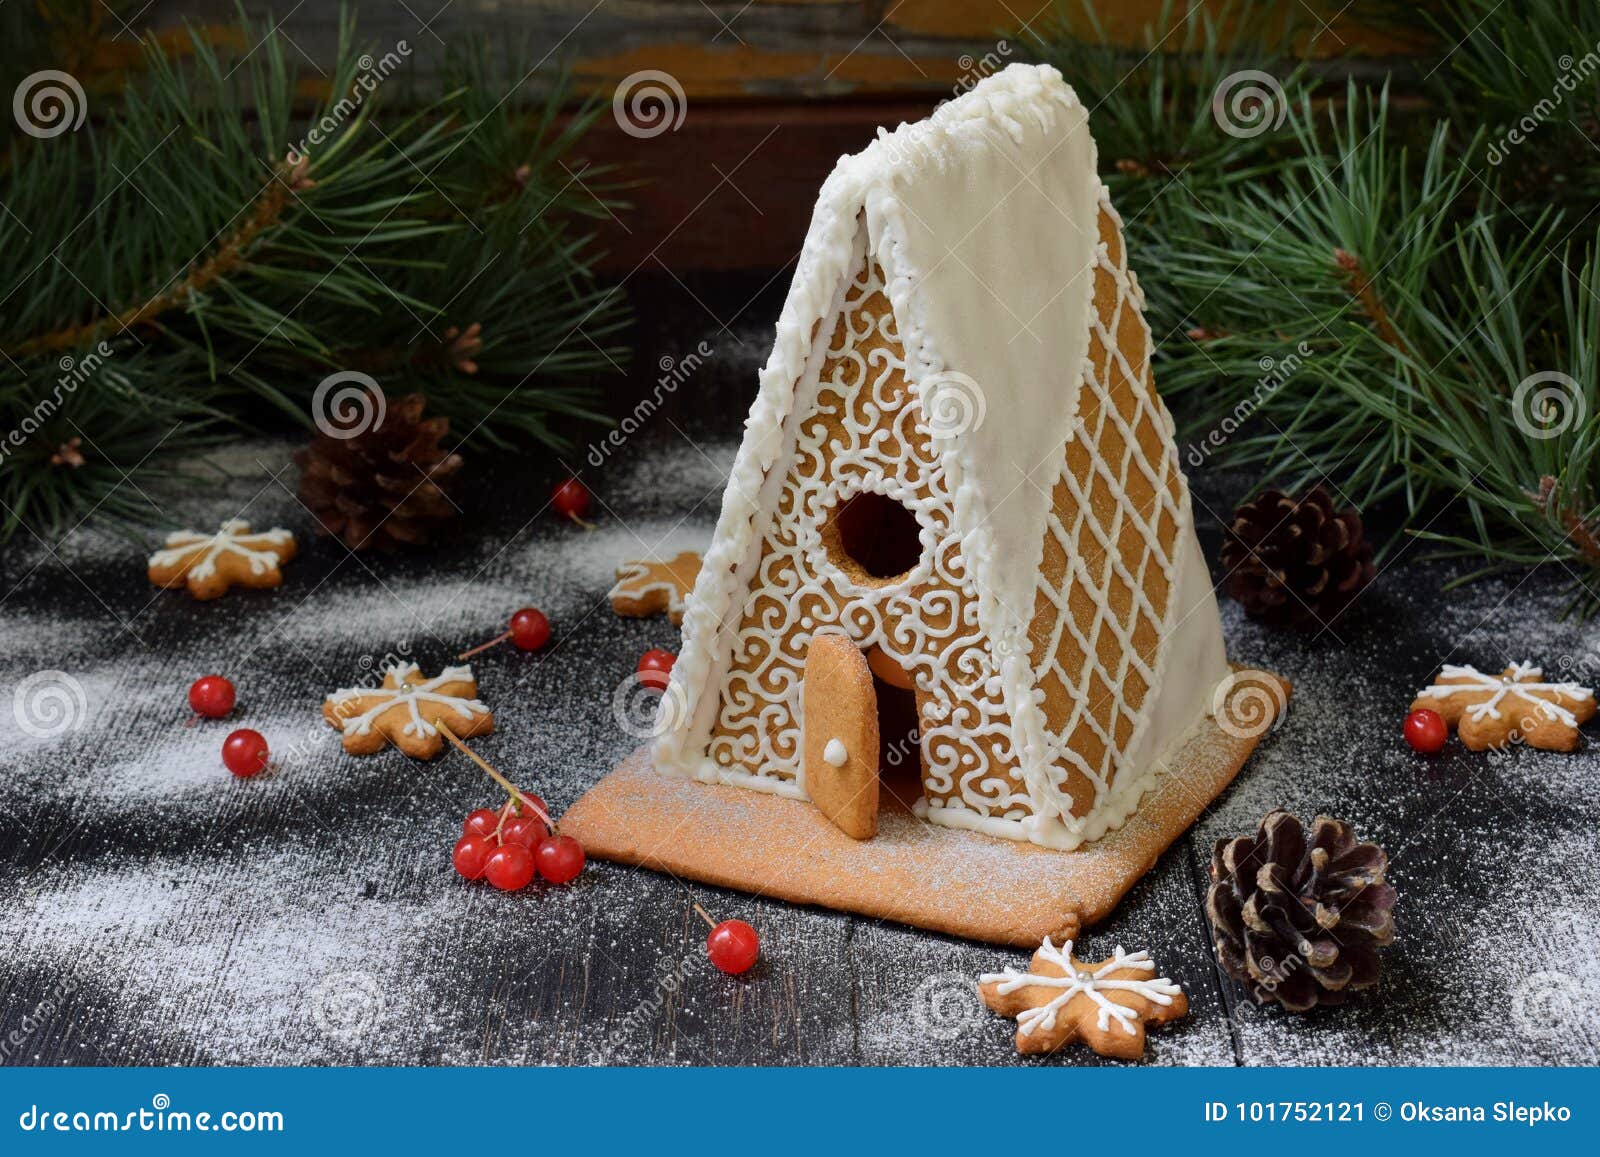 homemade gingerbread house with pine branches, cones and biscuits on dark background. european christmas traditions. xmas holiday